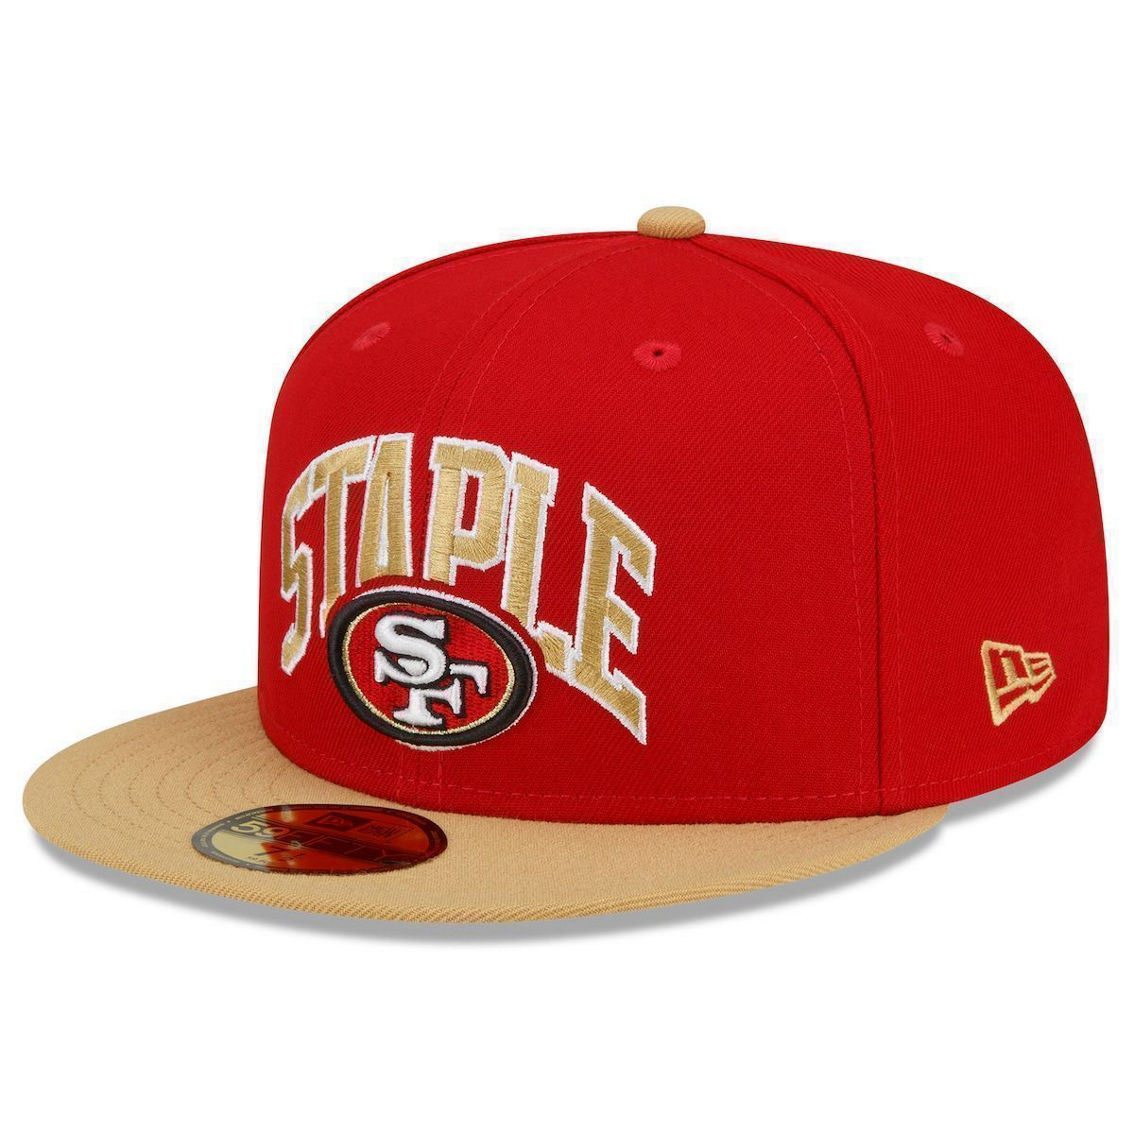 New Era x Staple Men's Scarlet/Gold San Francisco 49ers NFL x Collection 59FIFTY Fitted Hat - Image 4 of 4